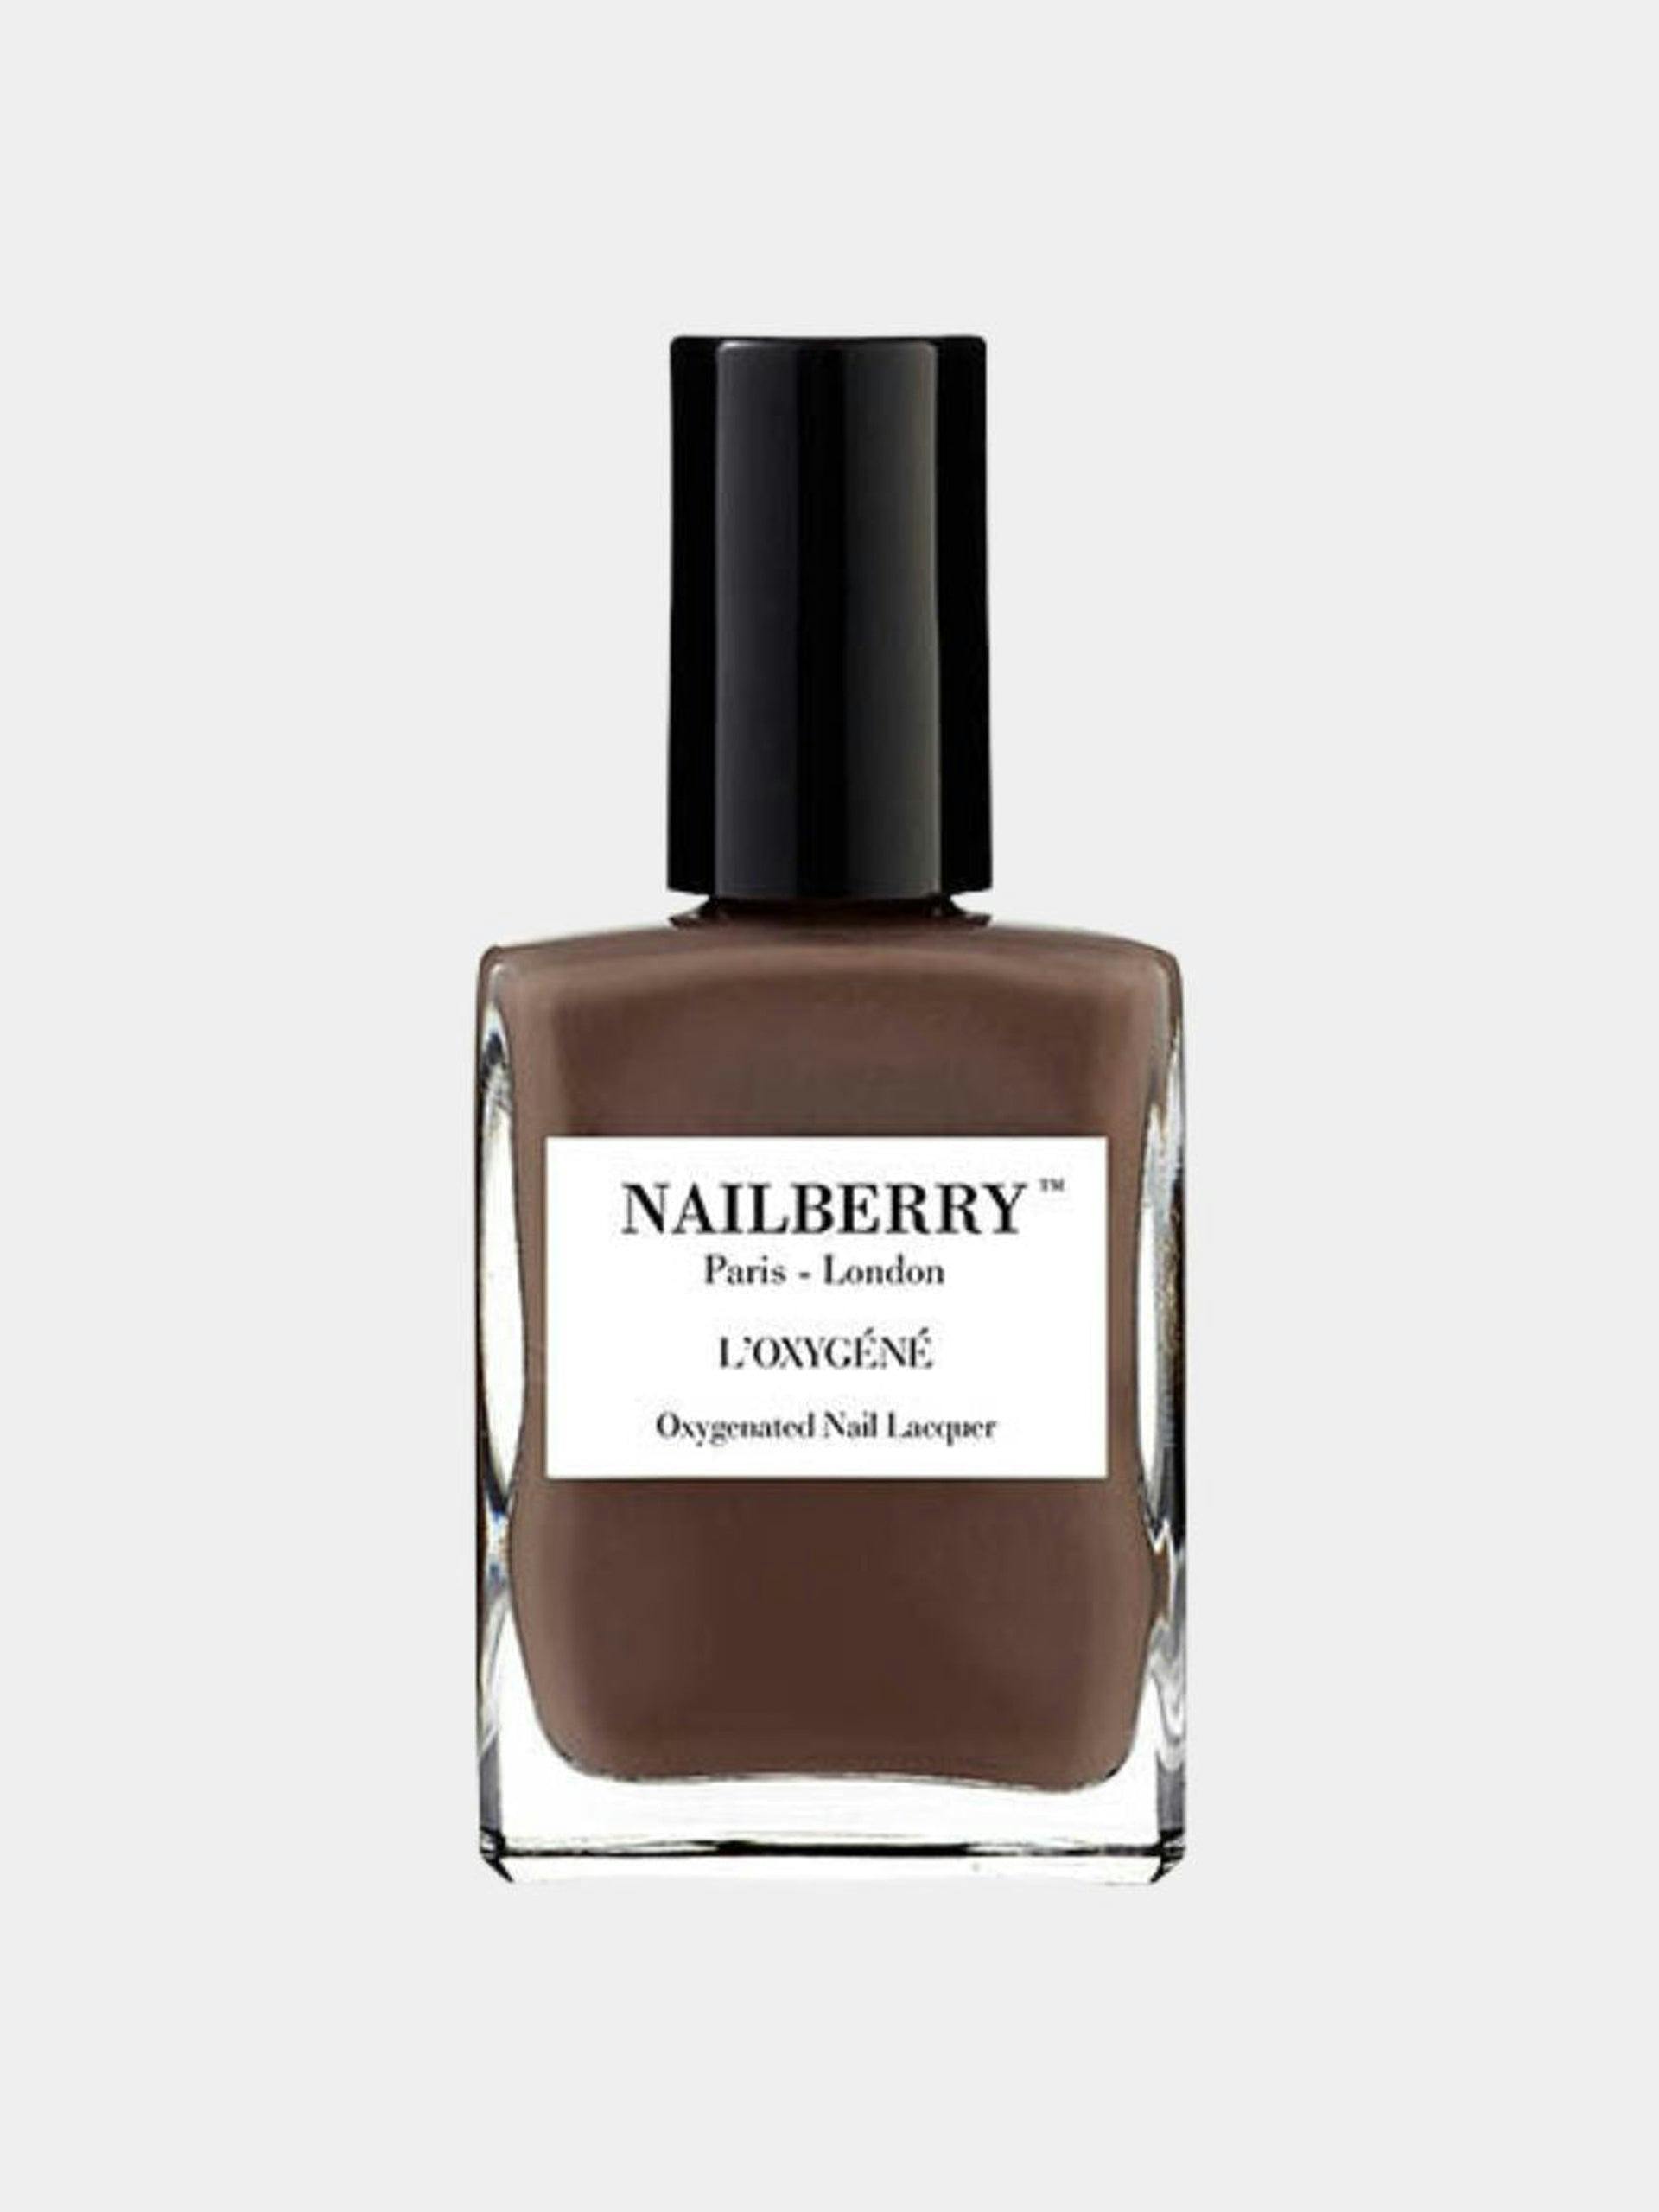 Nail lacquer in deep taupe